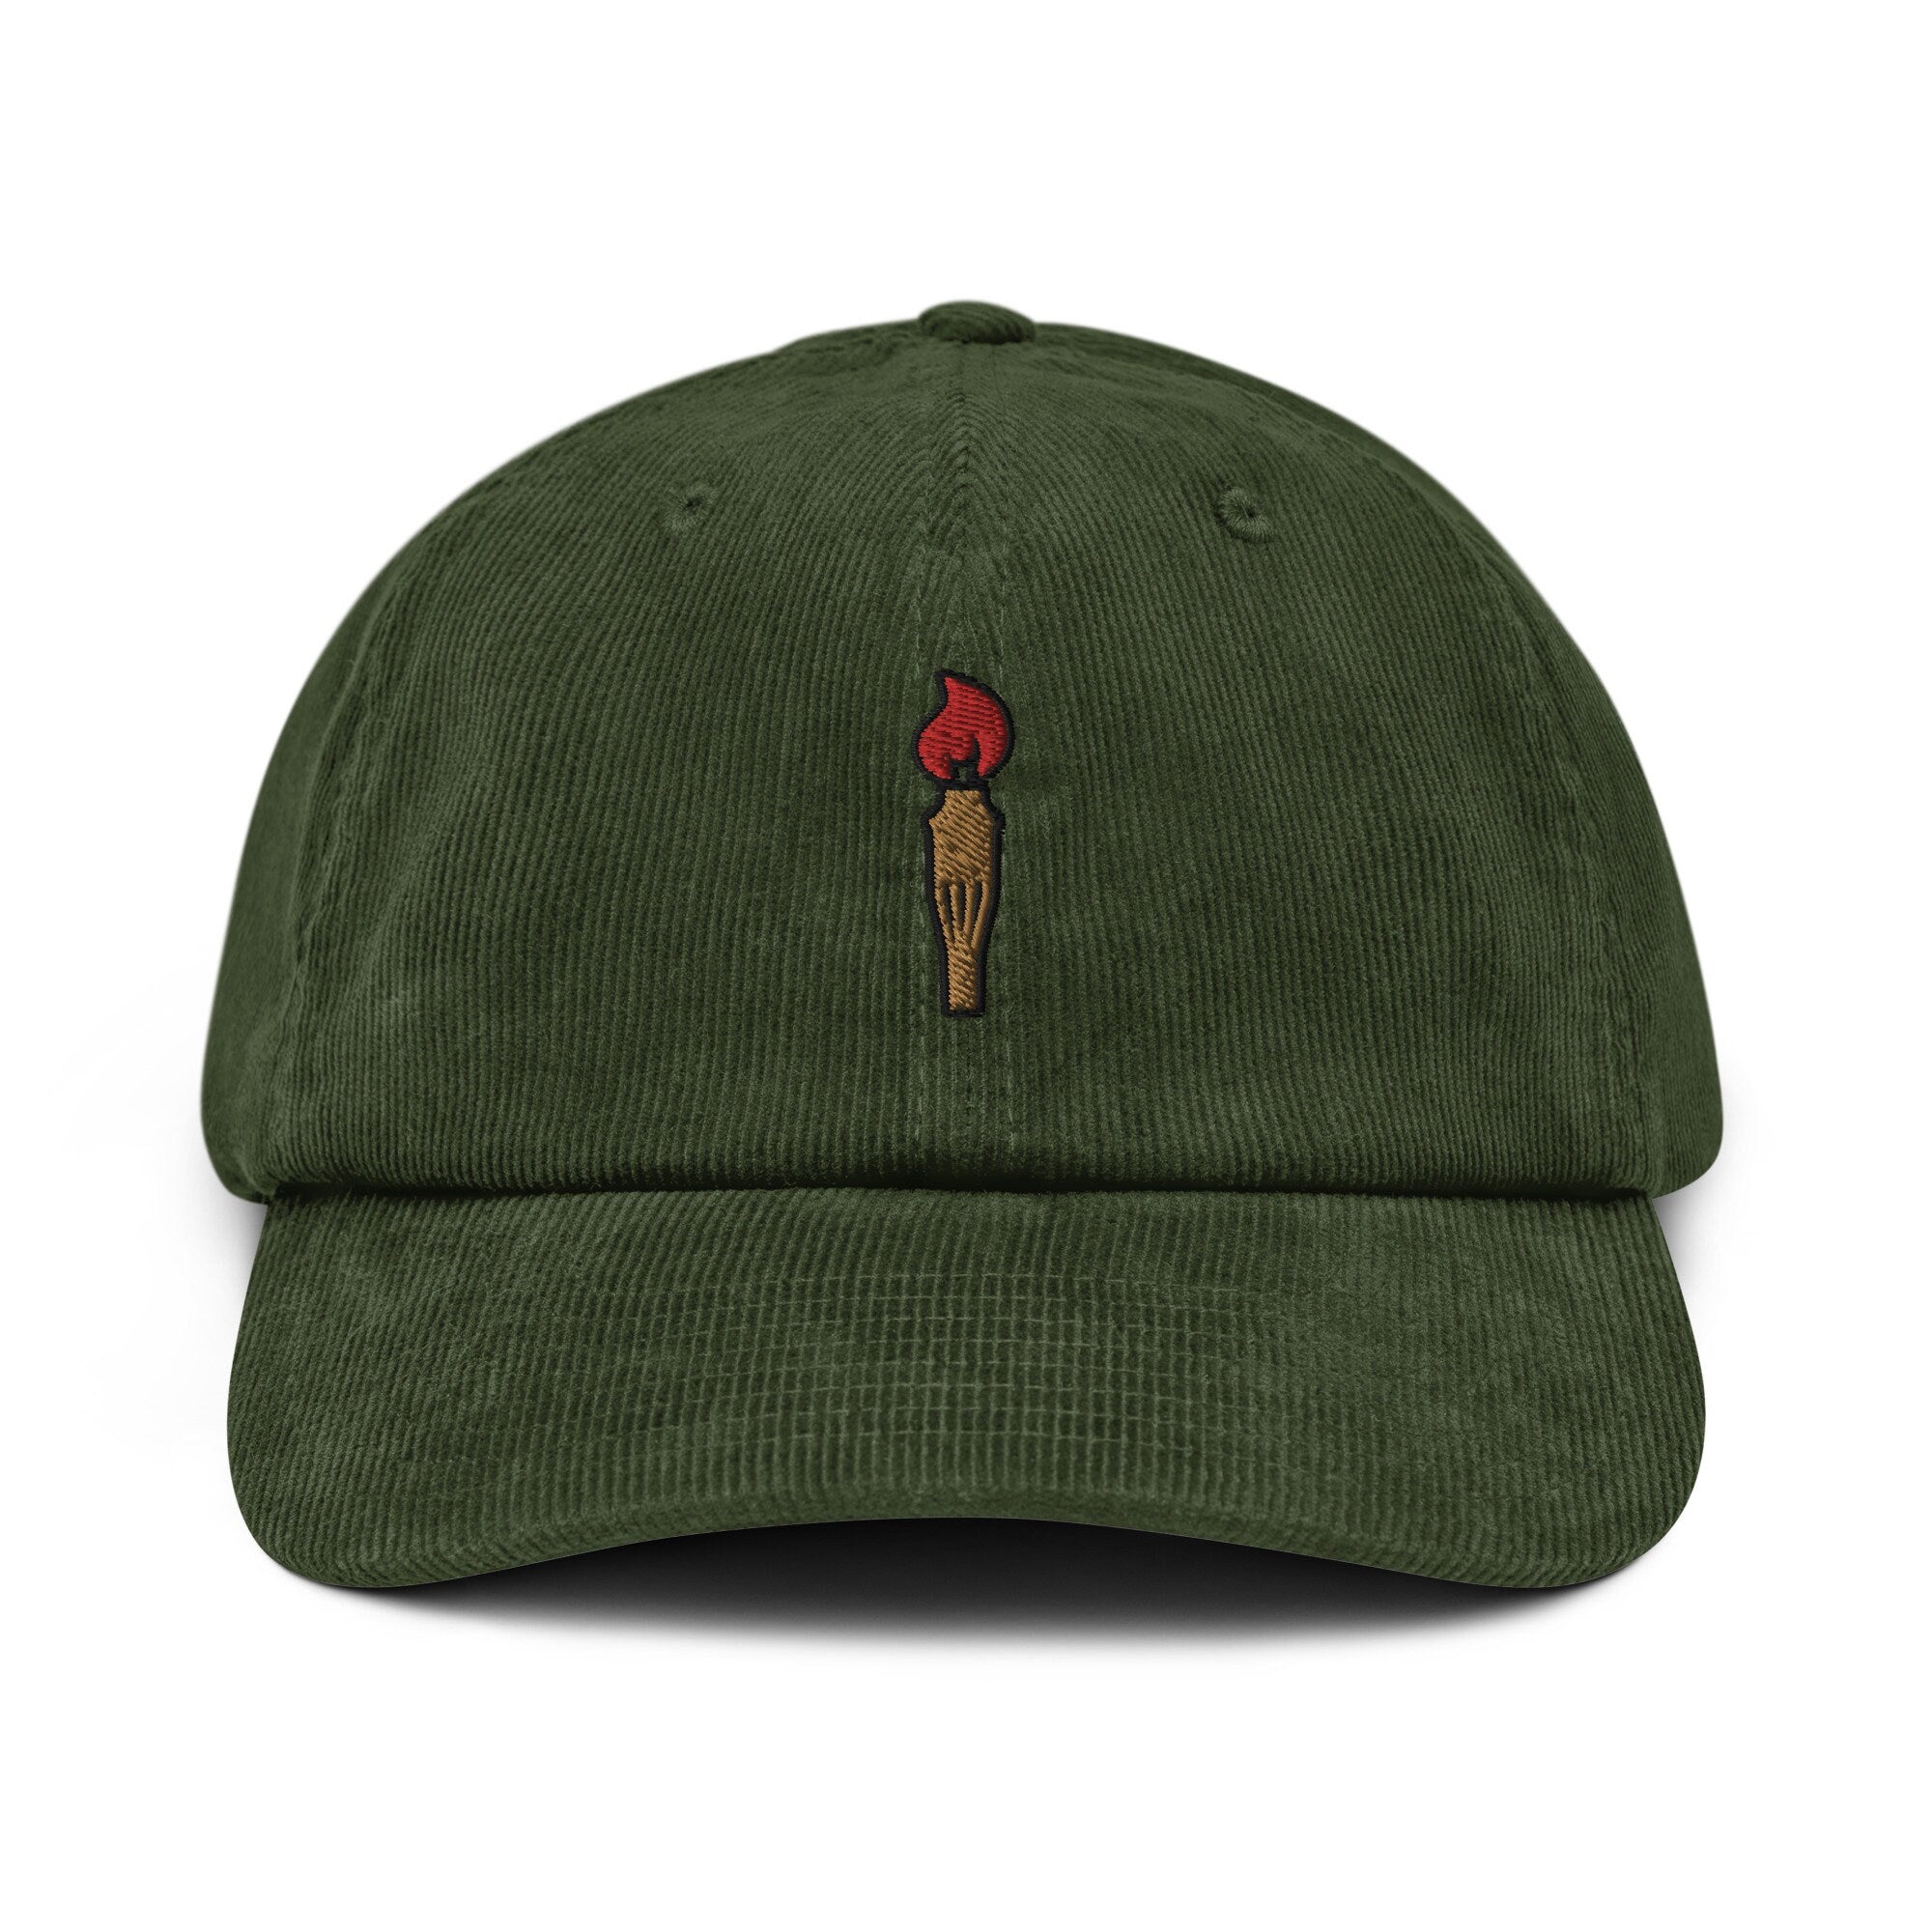 Tiki Torch Corduroy Hat, Handmade Embroidered Corduroy Dad Cap - Multiple Colors